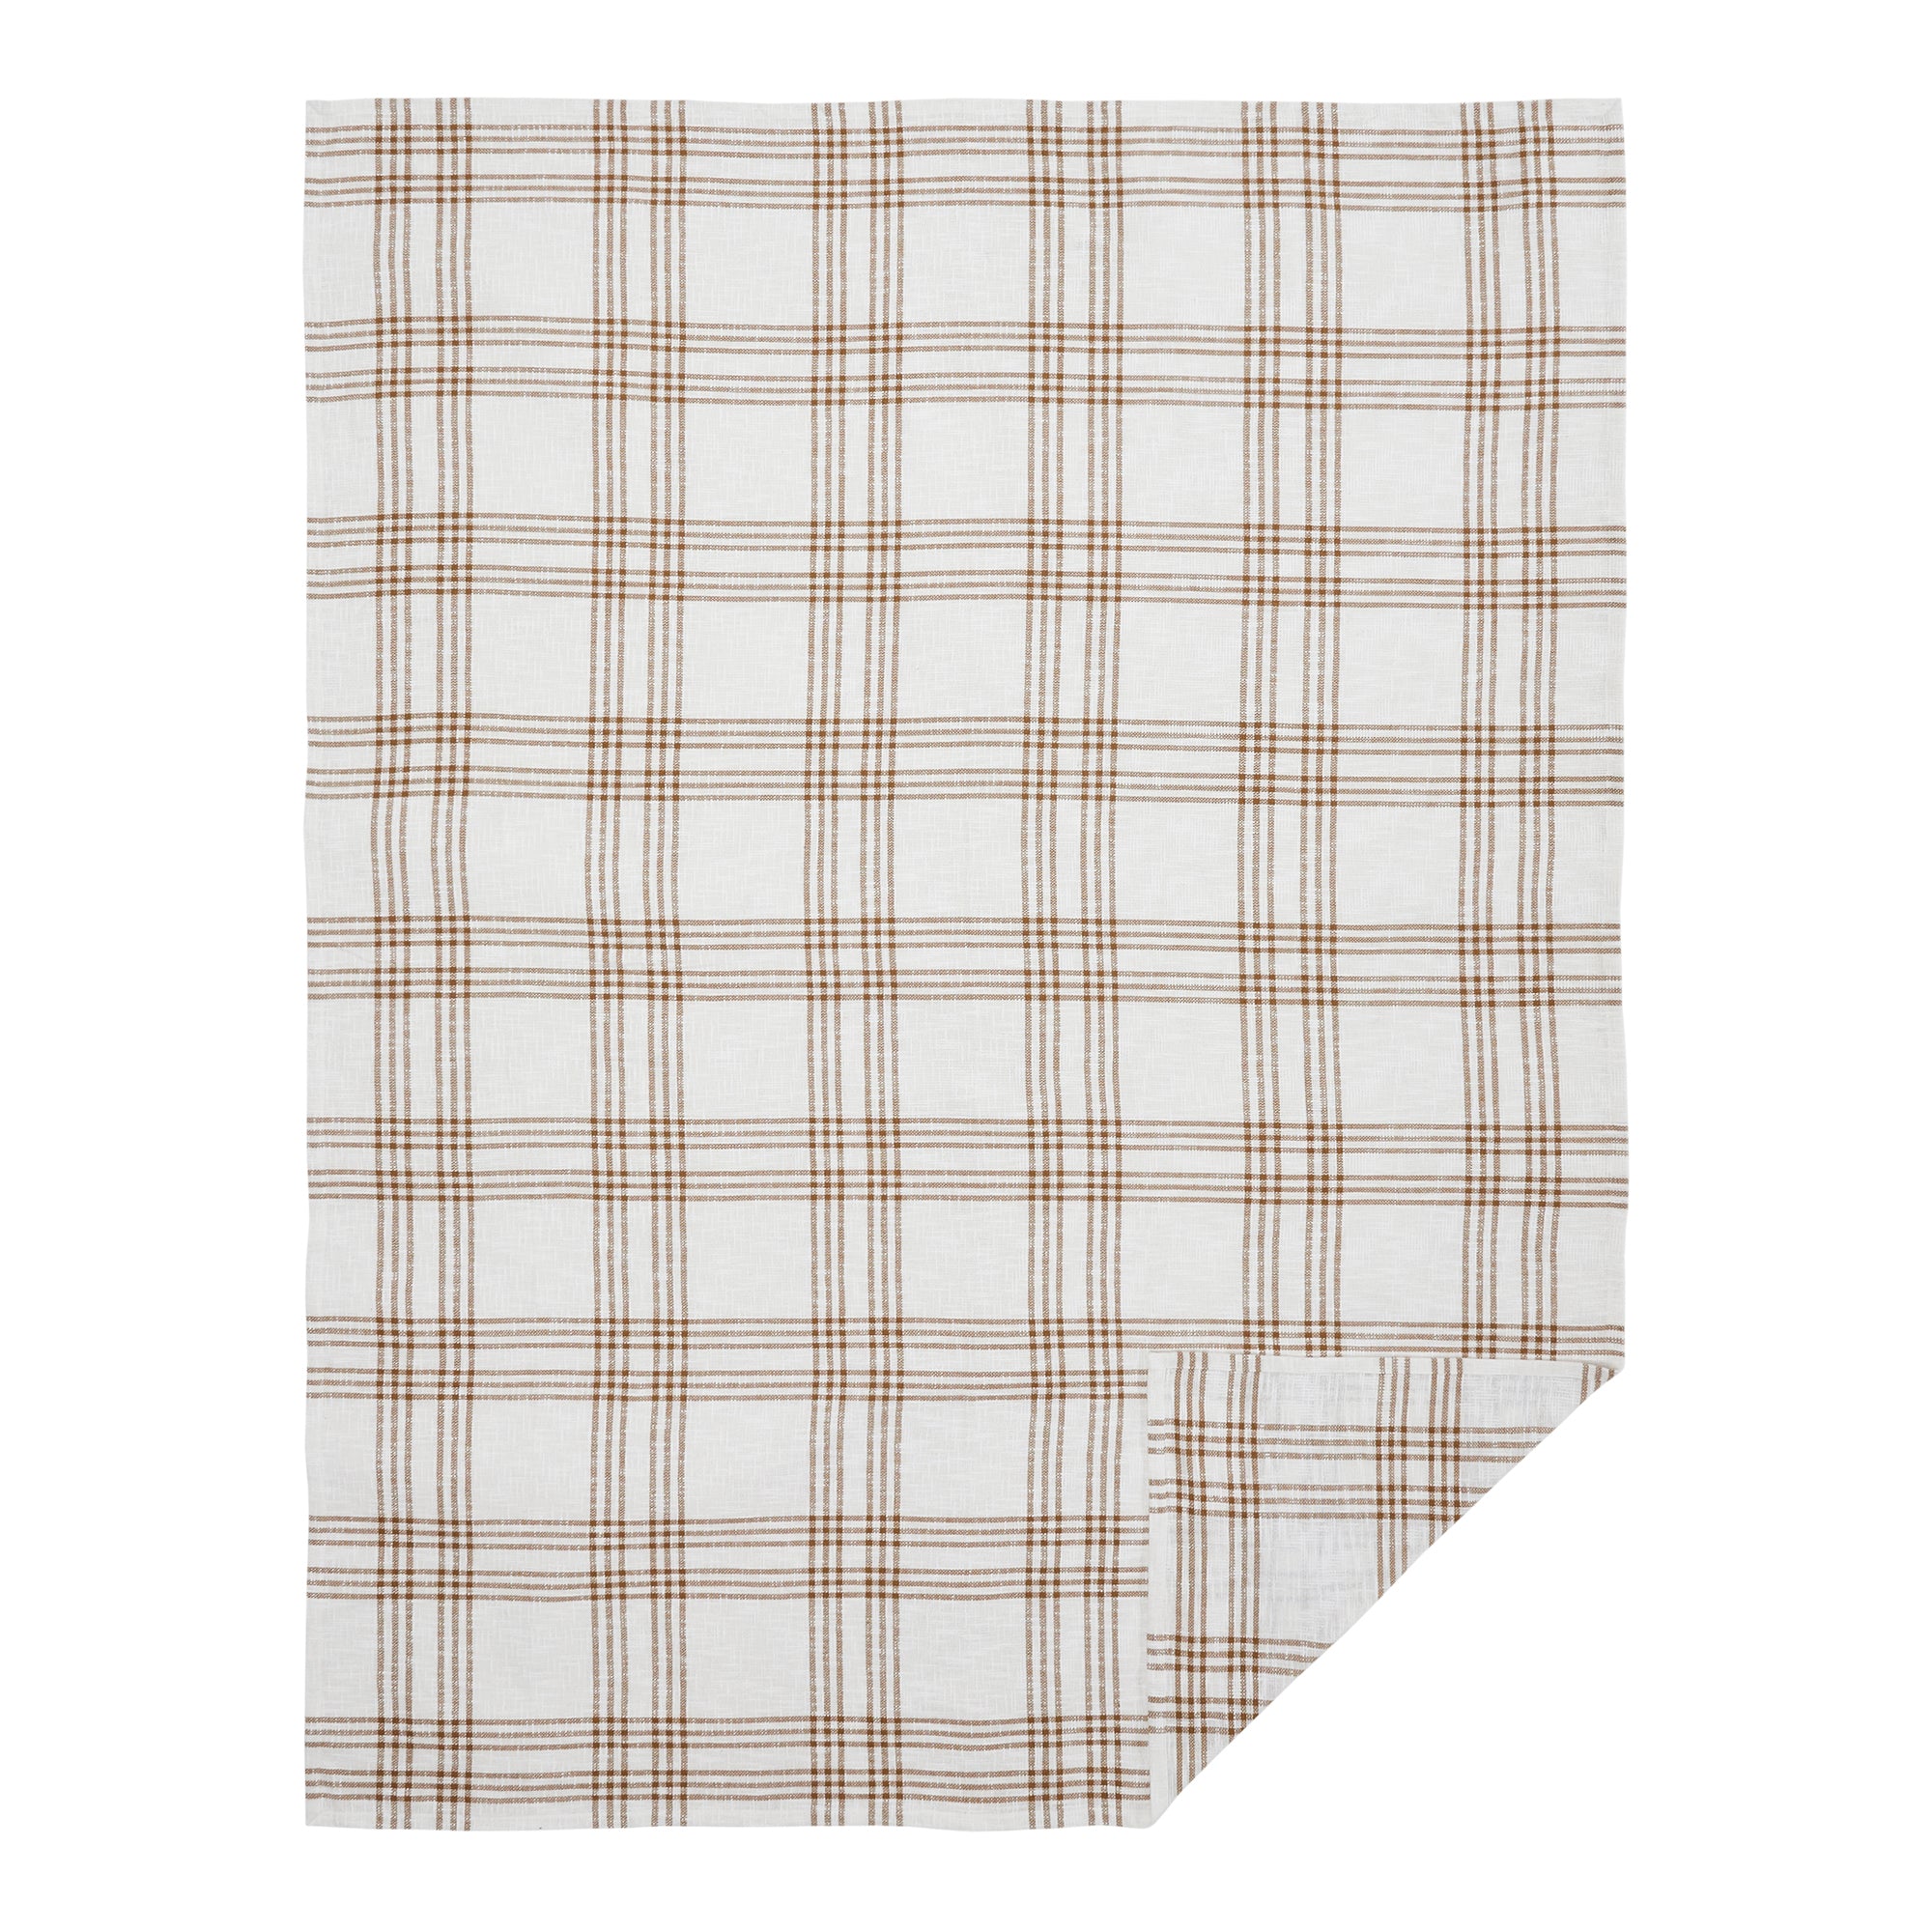 April & Olive Wheat Plaid Twin Coverlet 70x90 By VHC Brands